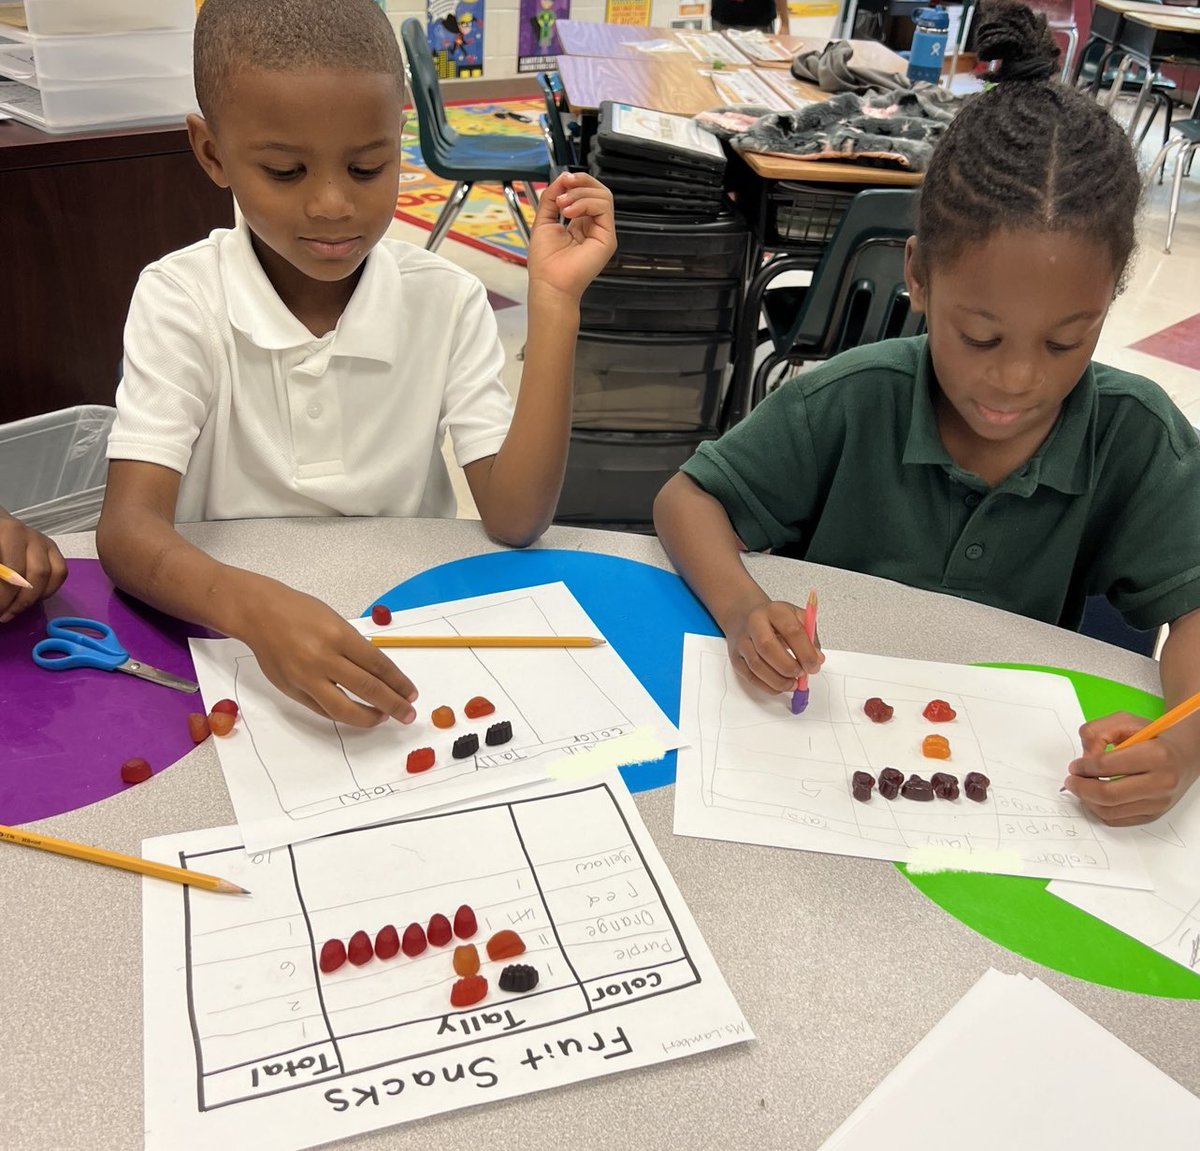 We loved working on gathering data with fruit snacks in math #smallgroups this week! ✨
#PandasSOAR  #TopPandas2023 @ParksideIB @parksideaps @PandaLitCoach